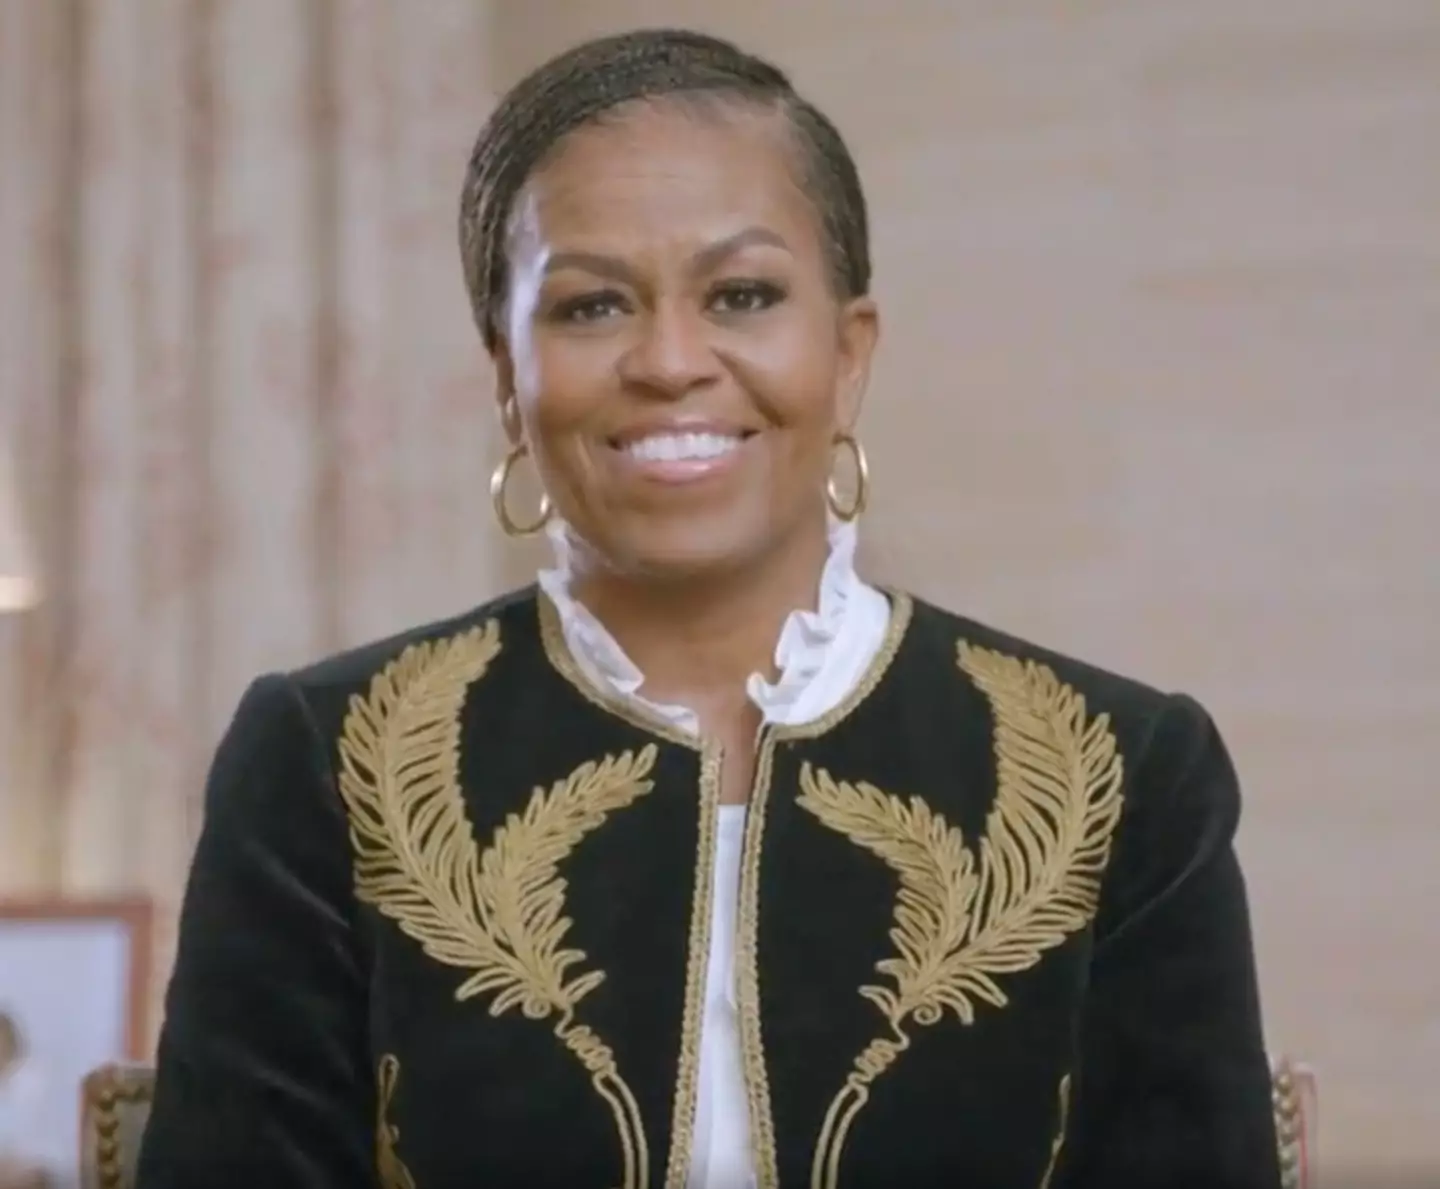 Michelle Obama has ruled herself out of the running for the White House.